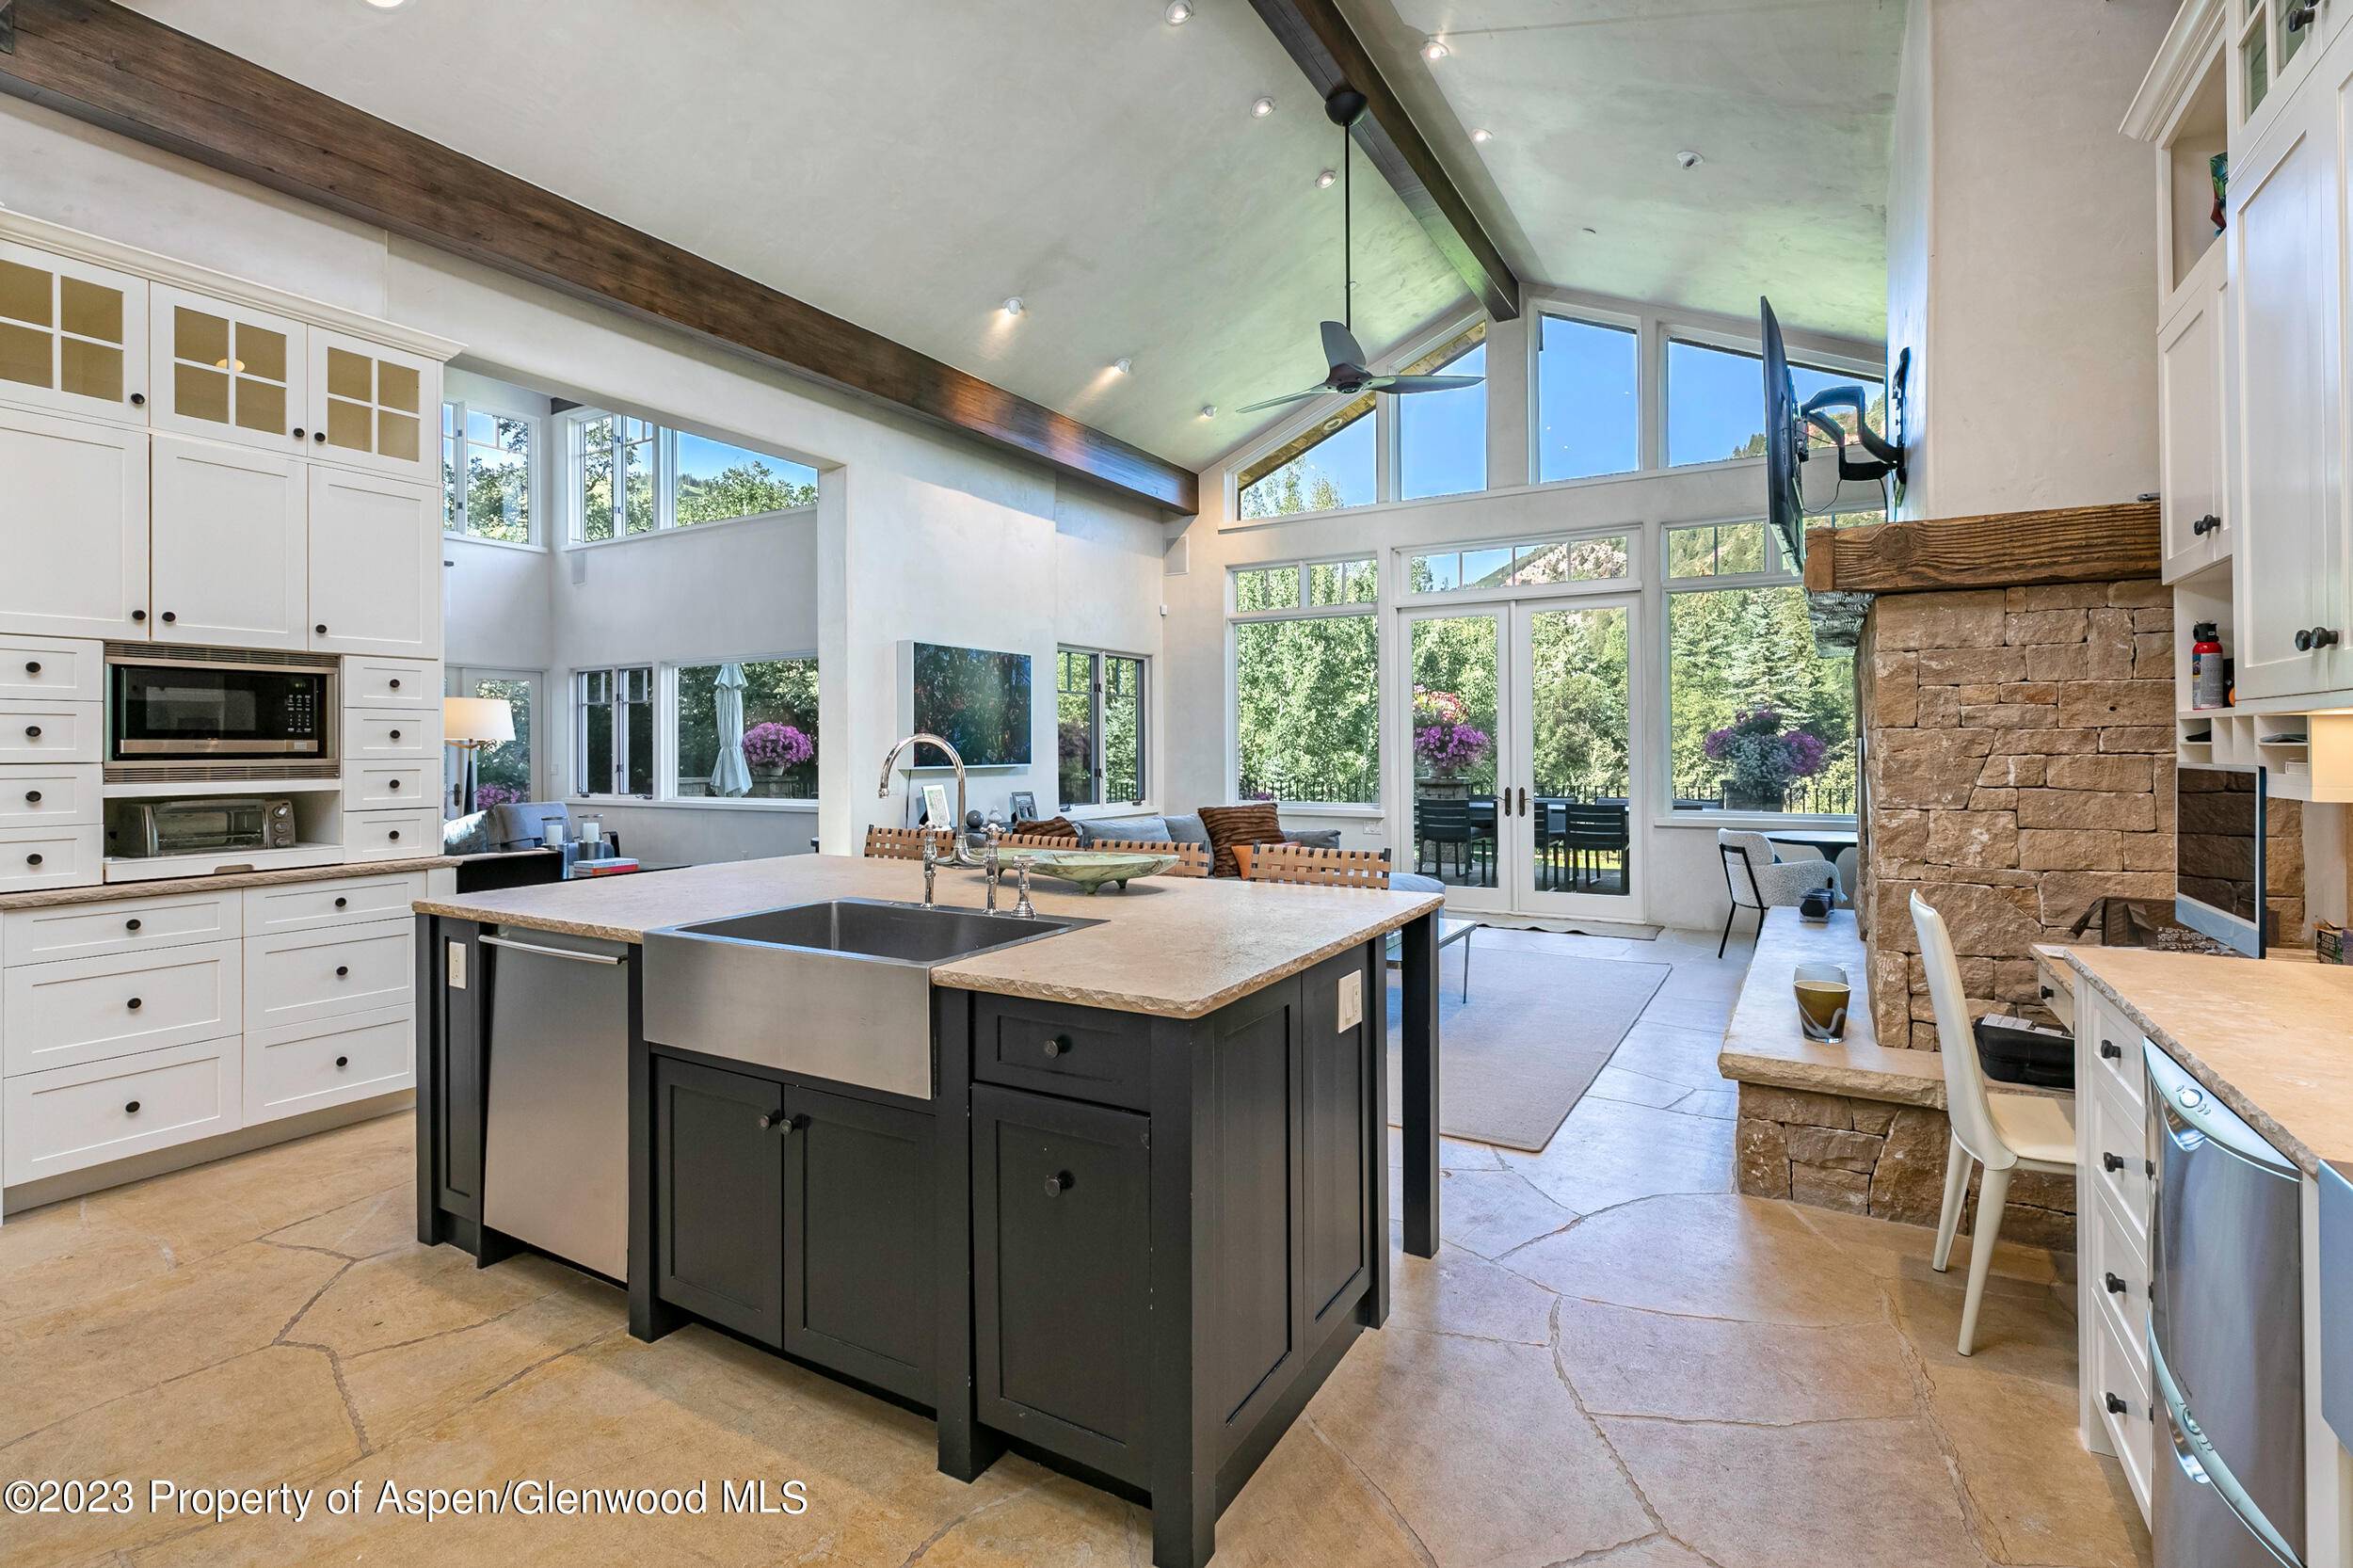 The Rocky Mountains meet the best of European design in this newly renovated six bedroom home in the exclusive and private area of Glen Eagle Drive.